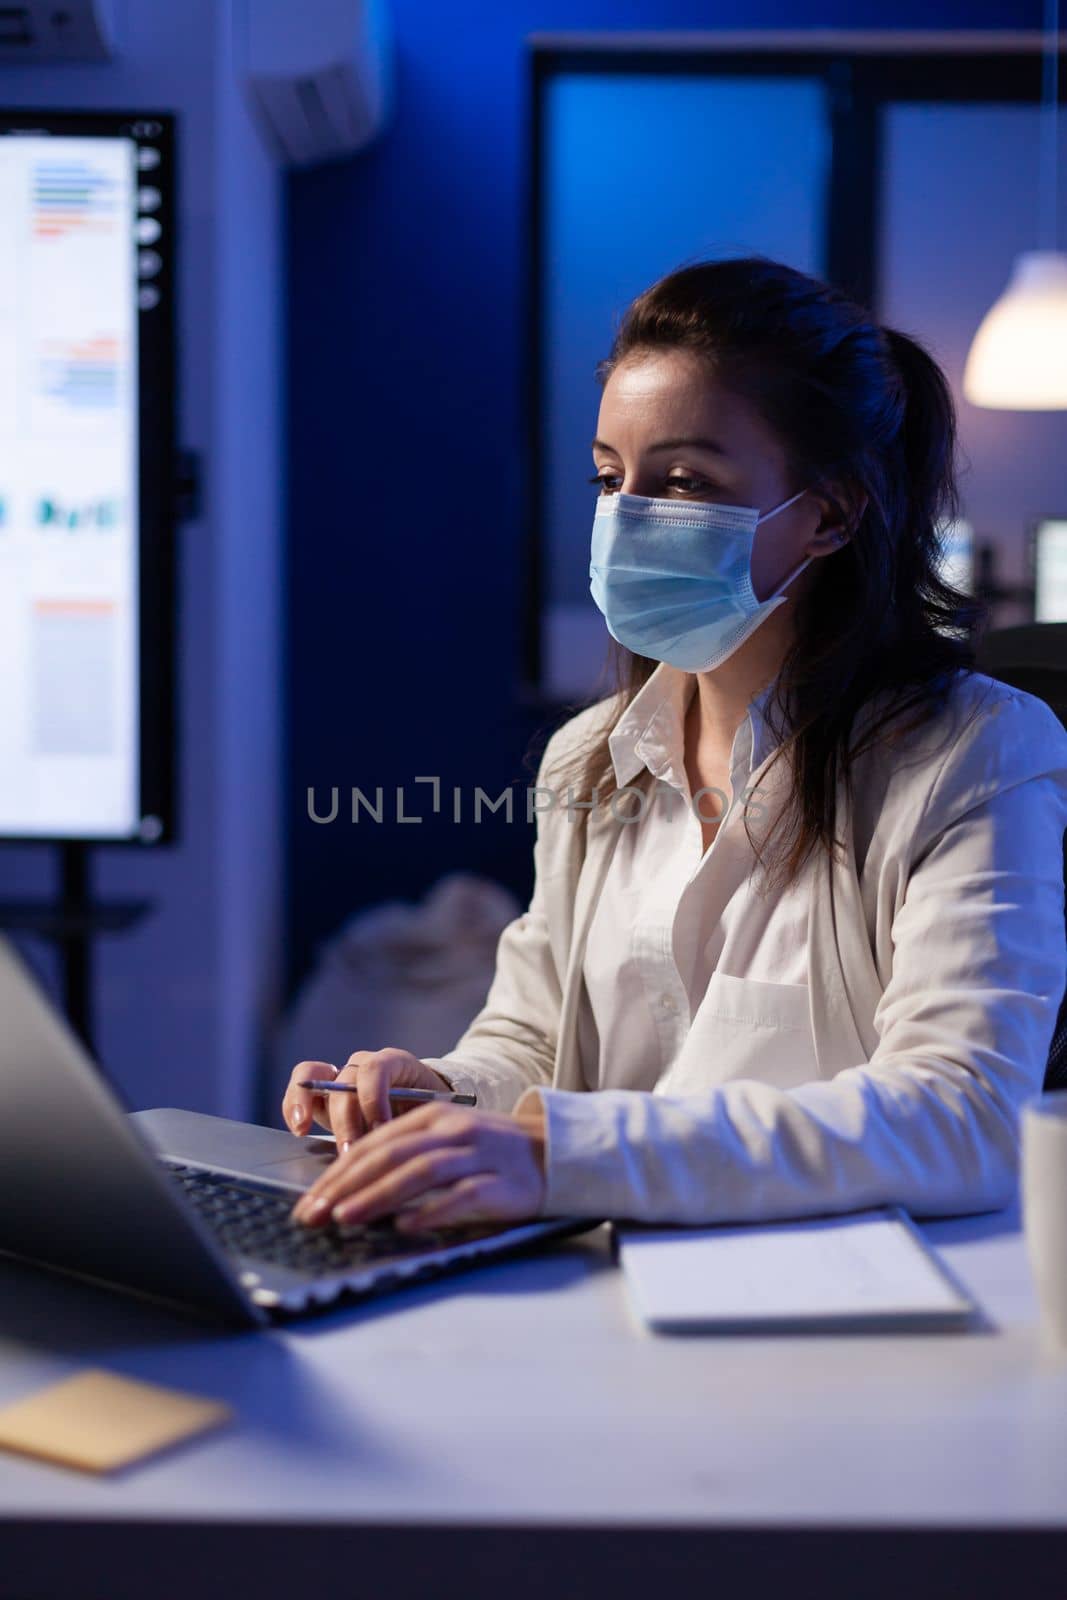 Manager woman with face mask working overtime in new normal business office looking at team project on professional laptop. Analysing financial documents sitting at desk during global pandemic